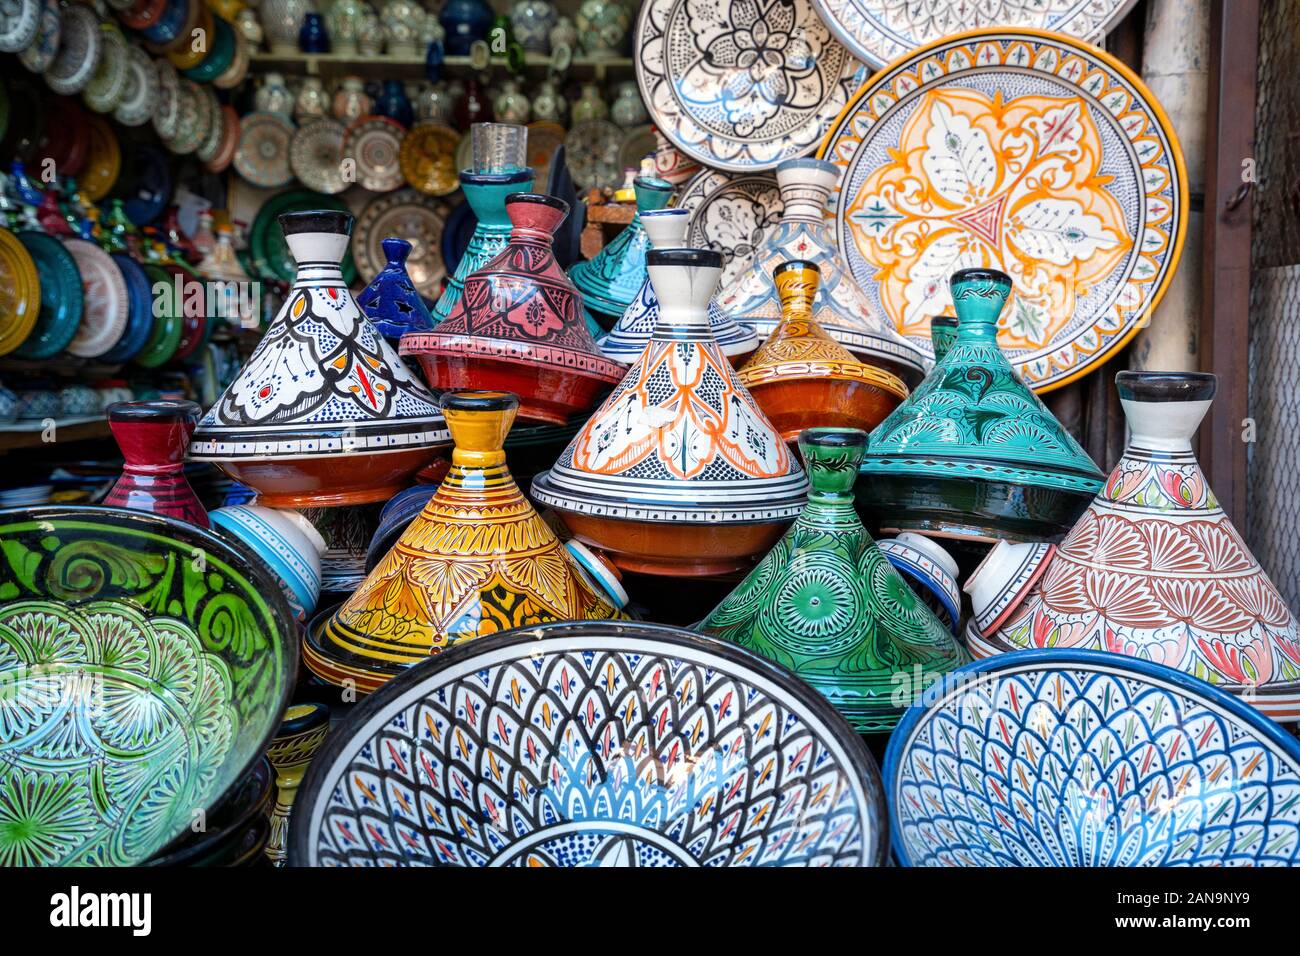 Colorful clay tagines sold in old town of Marrakech, Morocco Stock Photo